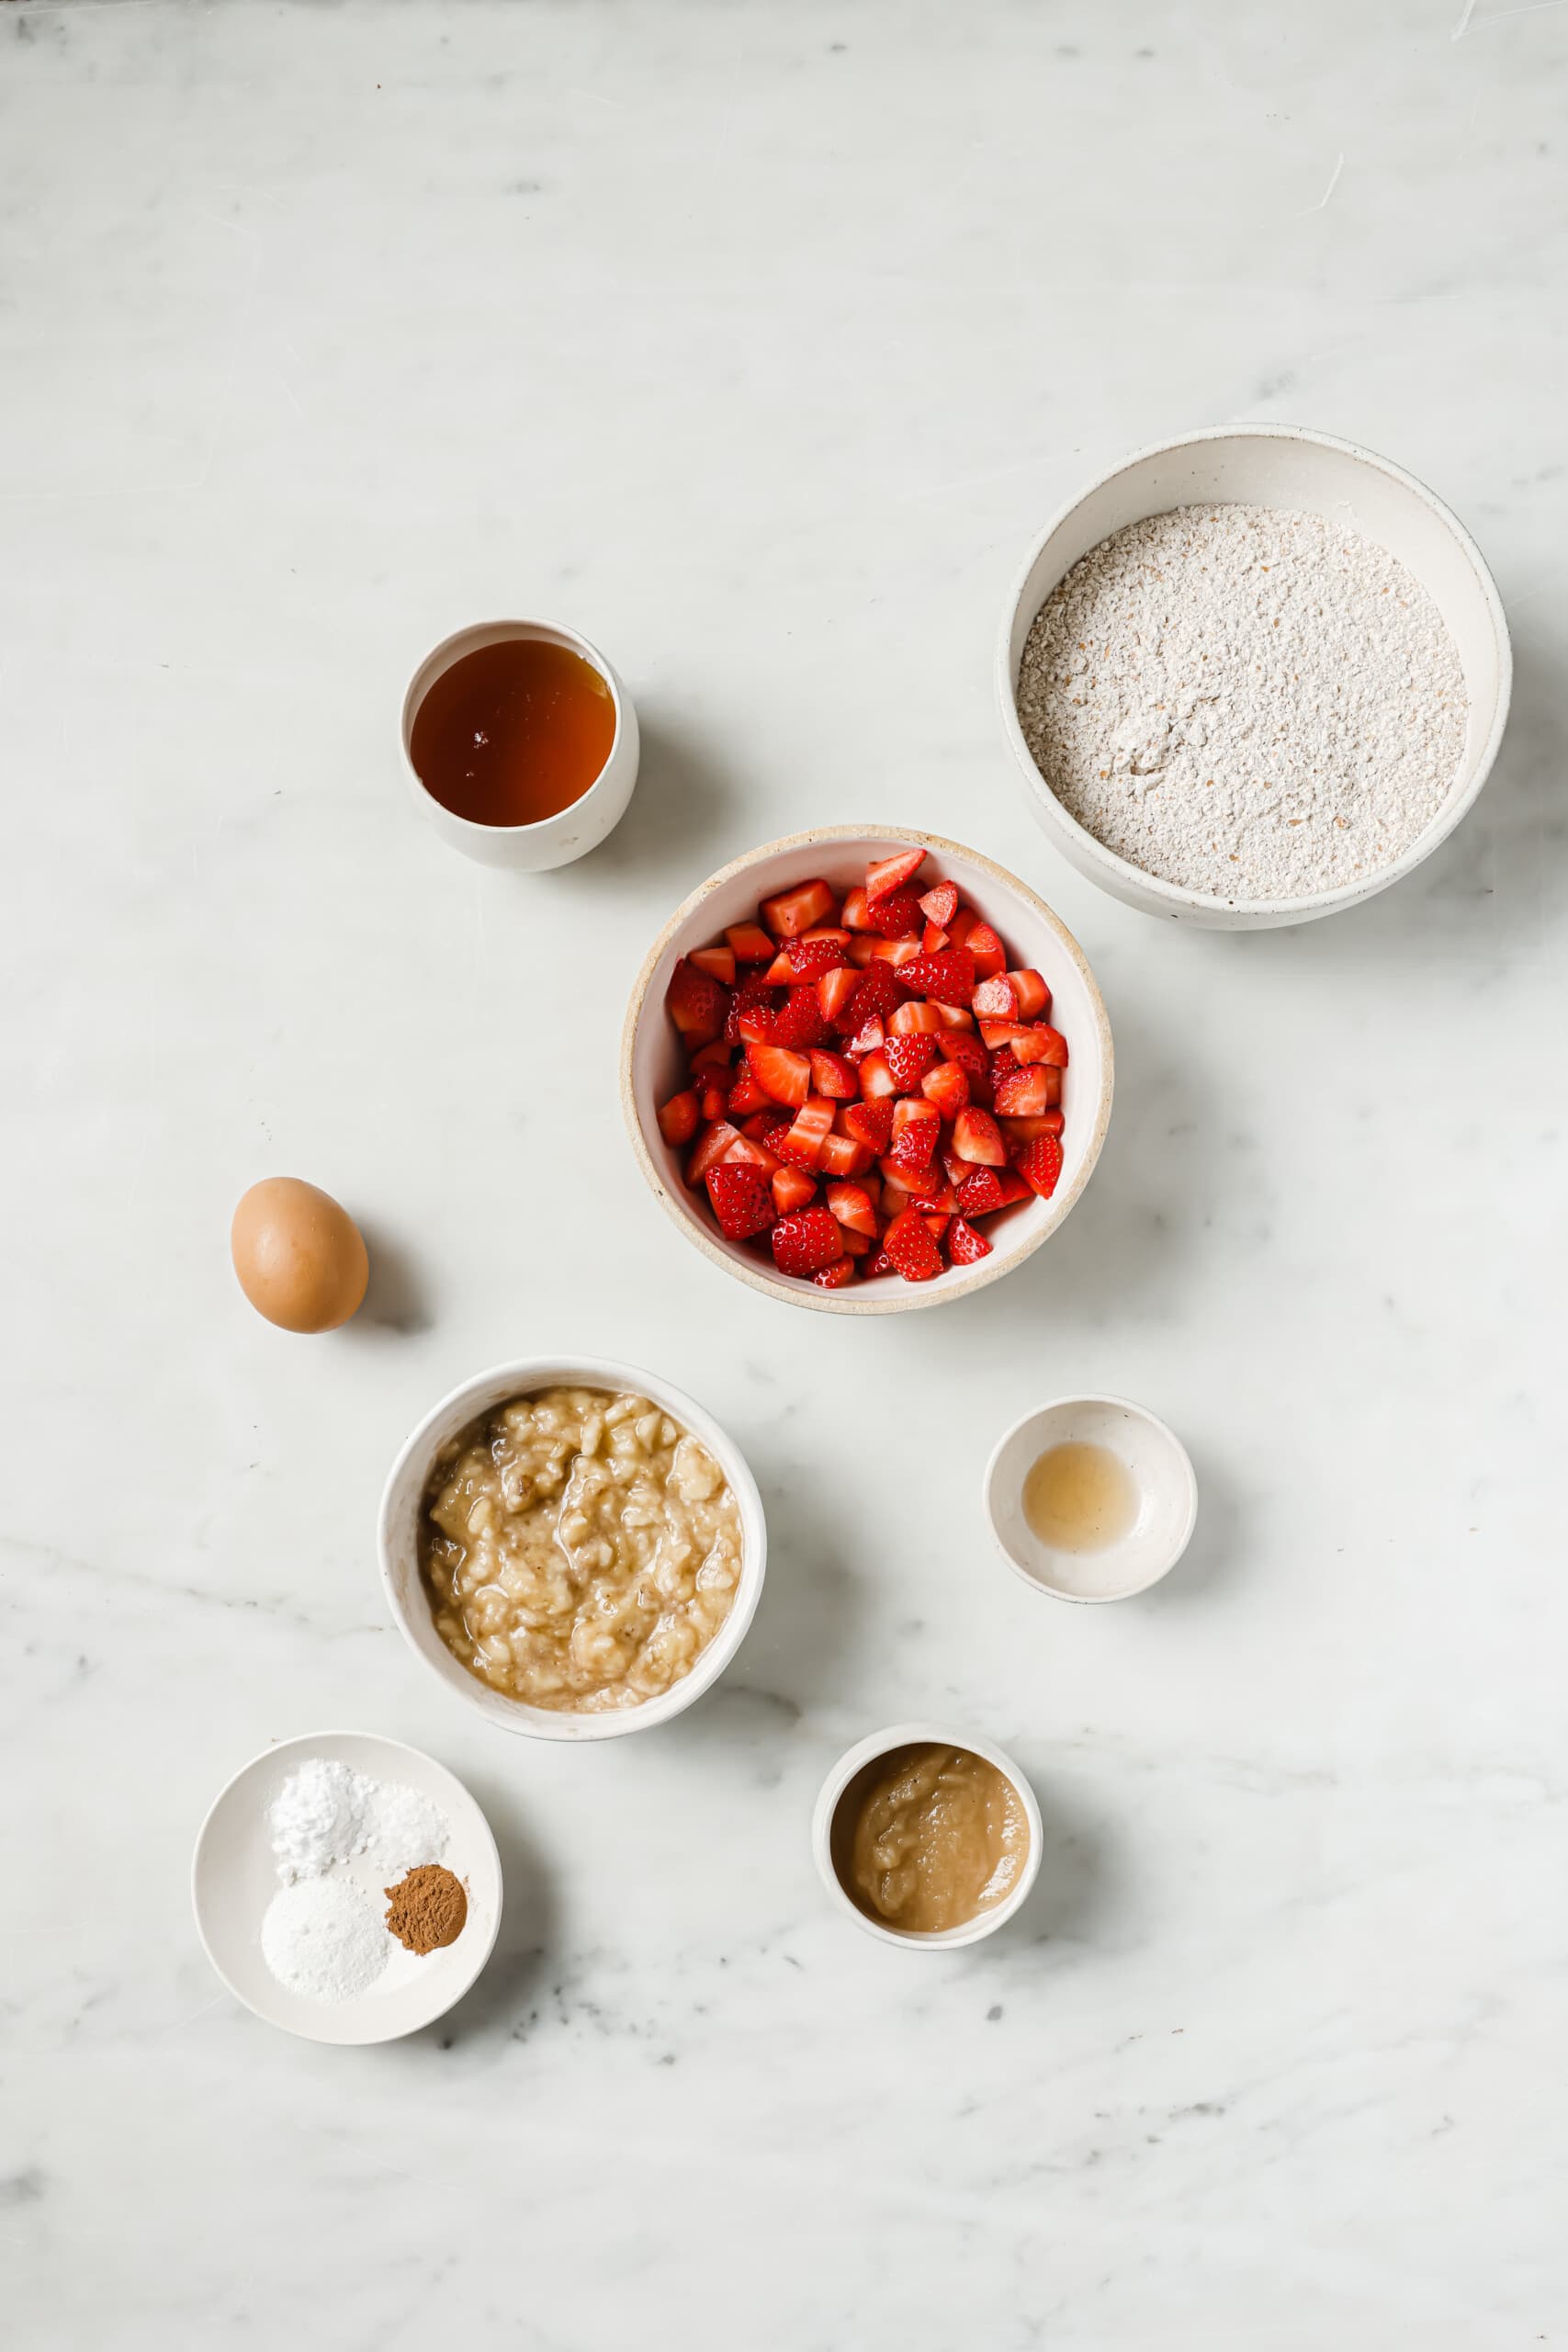 Ingredients for strawberry muffins.